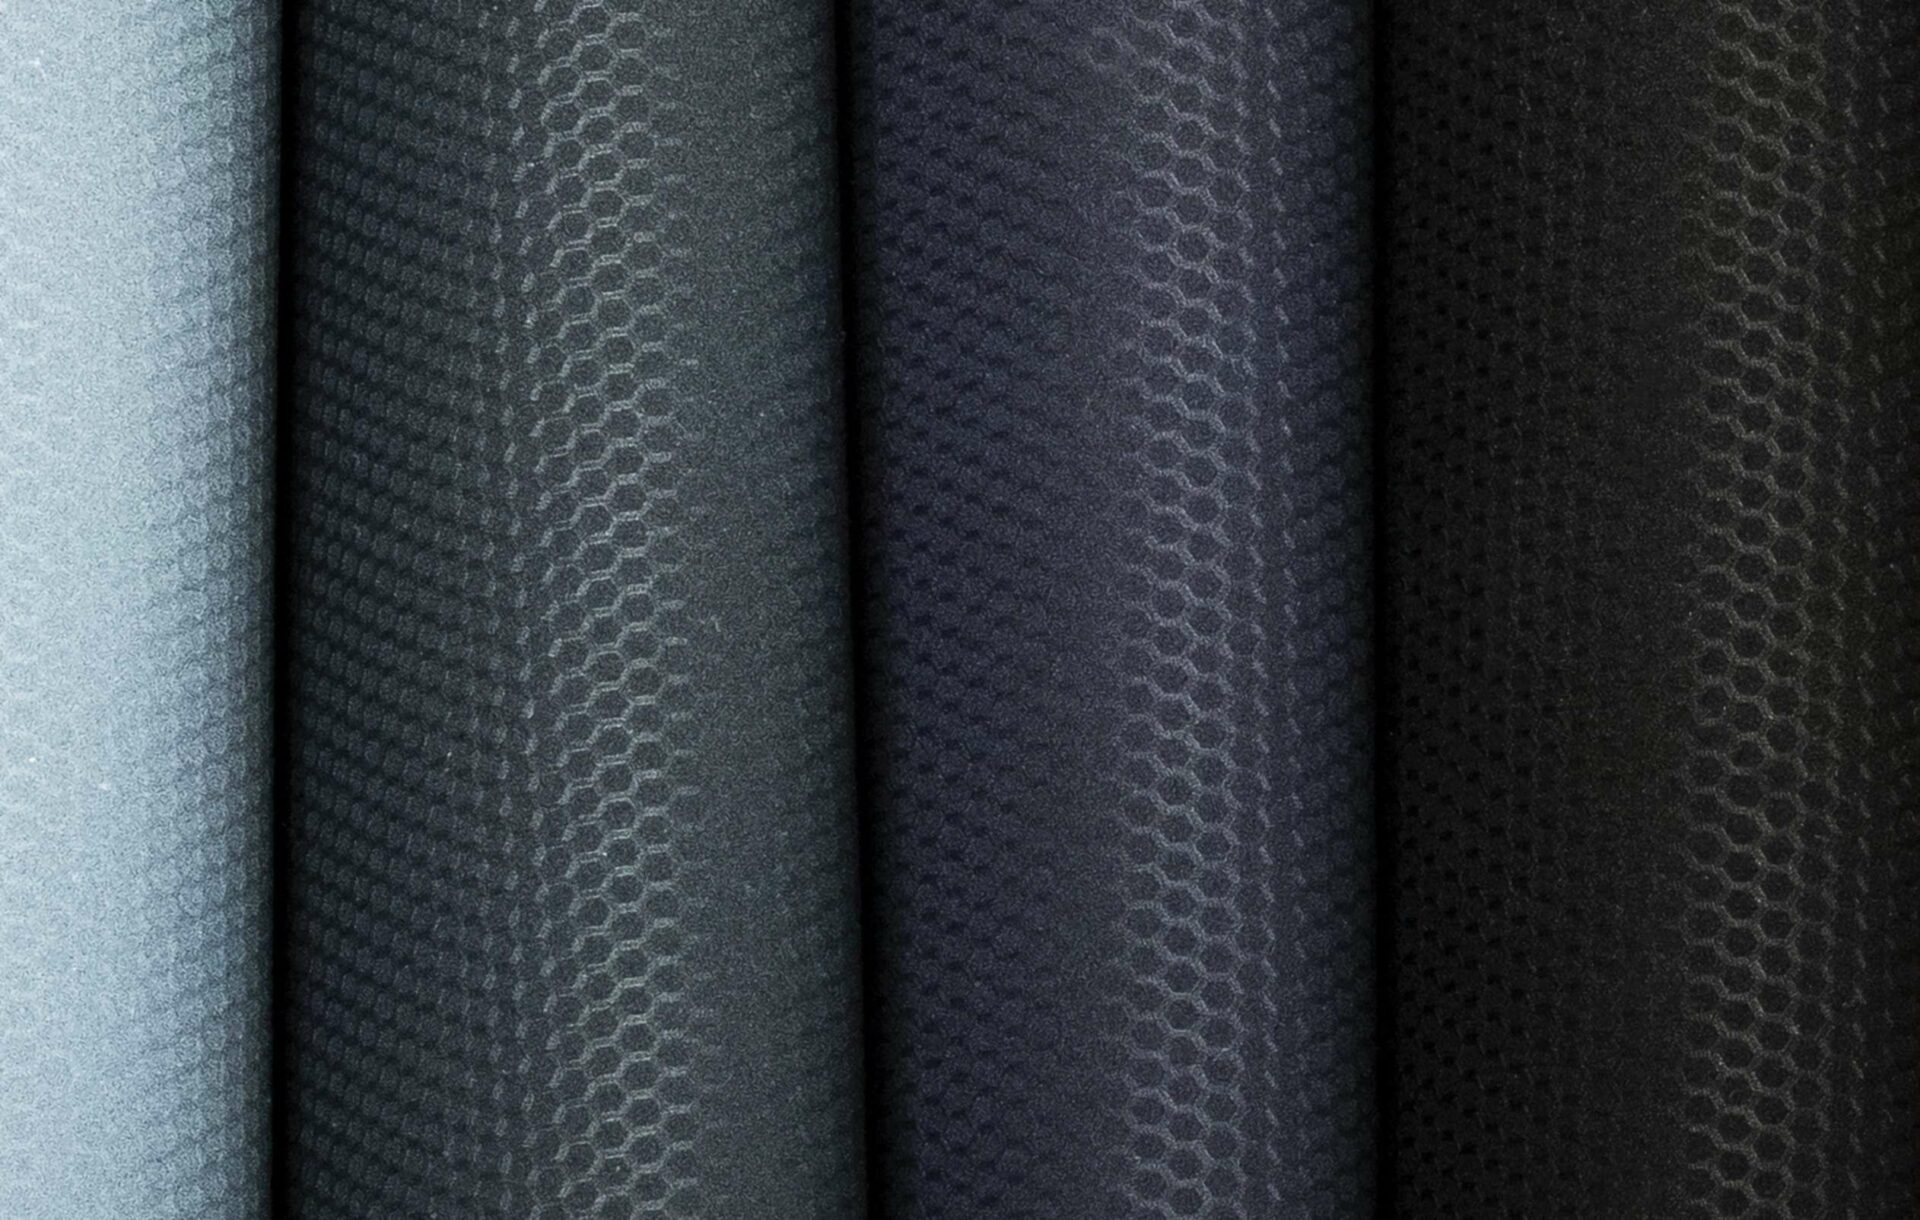 close up image of Supplement Tubes in Carbon, Fabric impression, Perlage